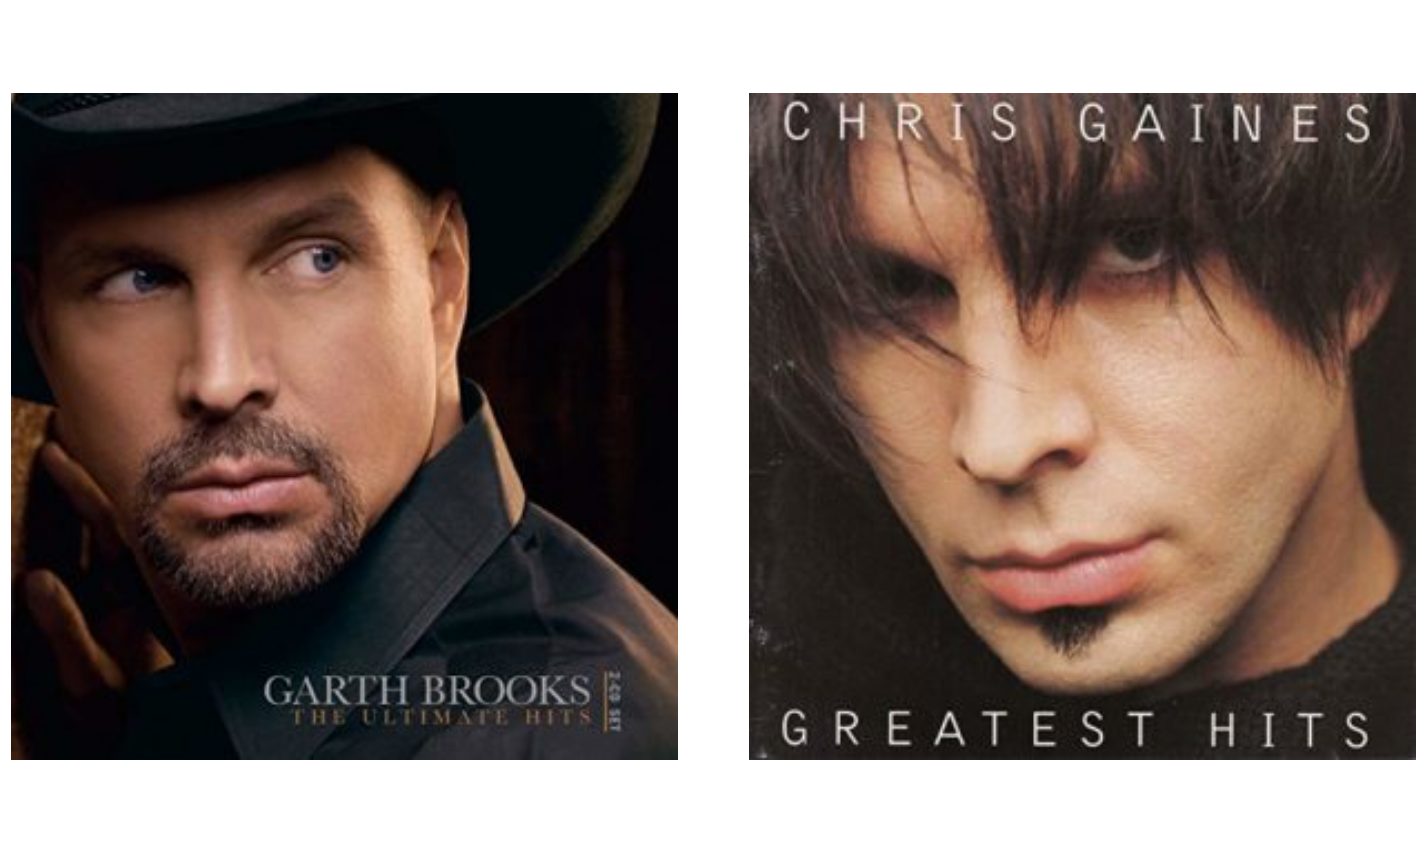 What do Garth Brooks and Chris Gaines, Cee-Lo Green and Gnarls Barkley have to do with your Business?